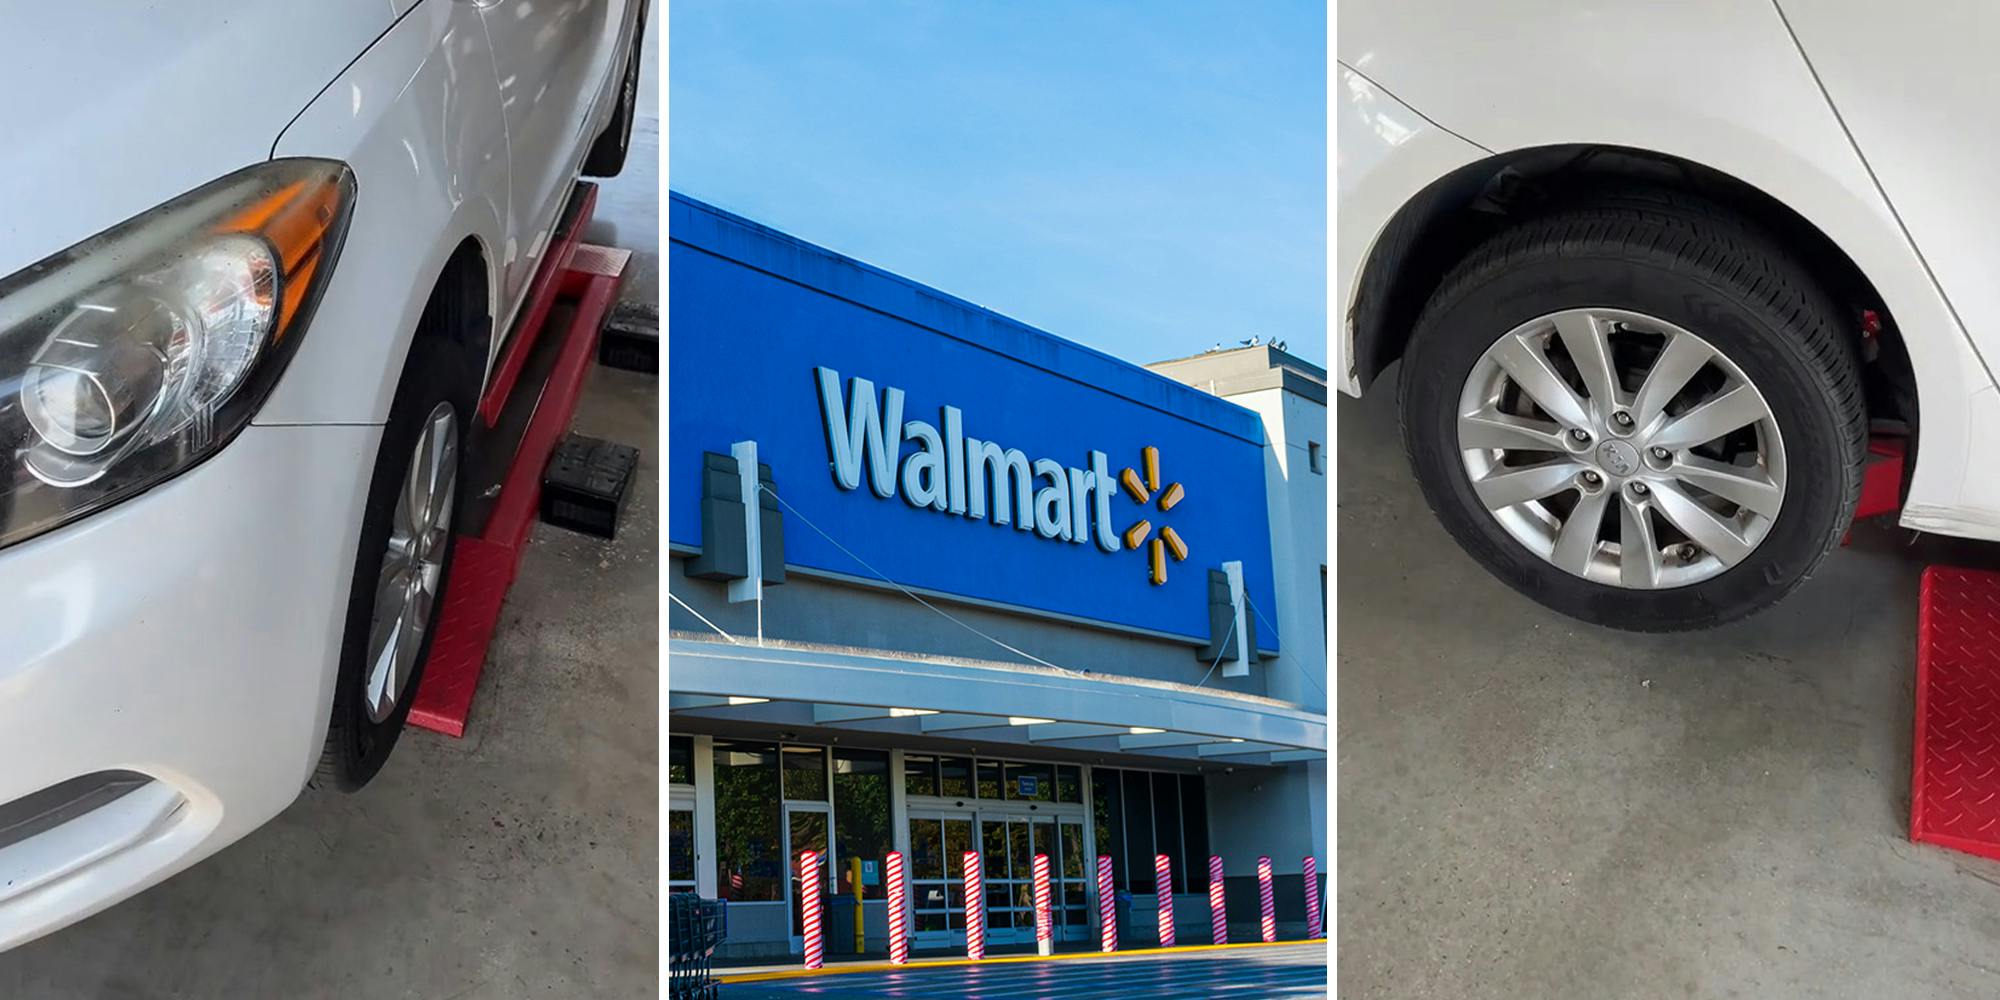 ‘She felt a bad vibration’: Mechanic issues warning about buying tires at Walmart, or even having them serviced